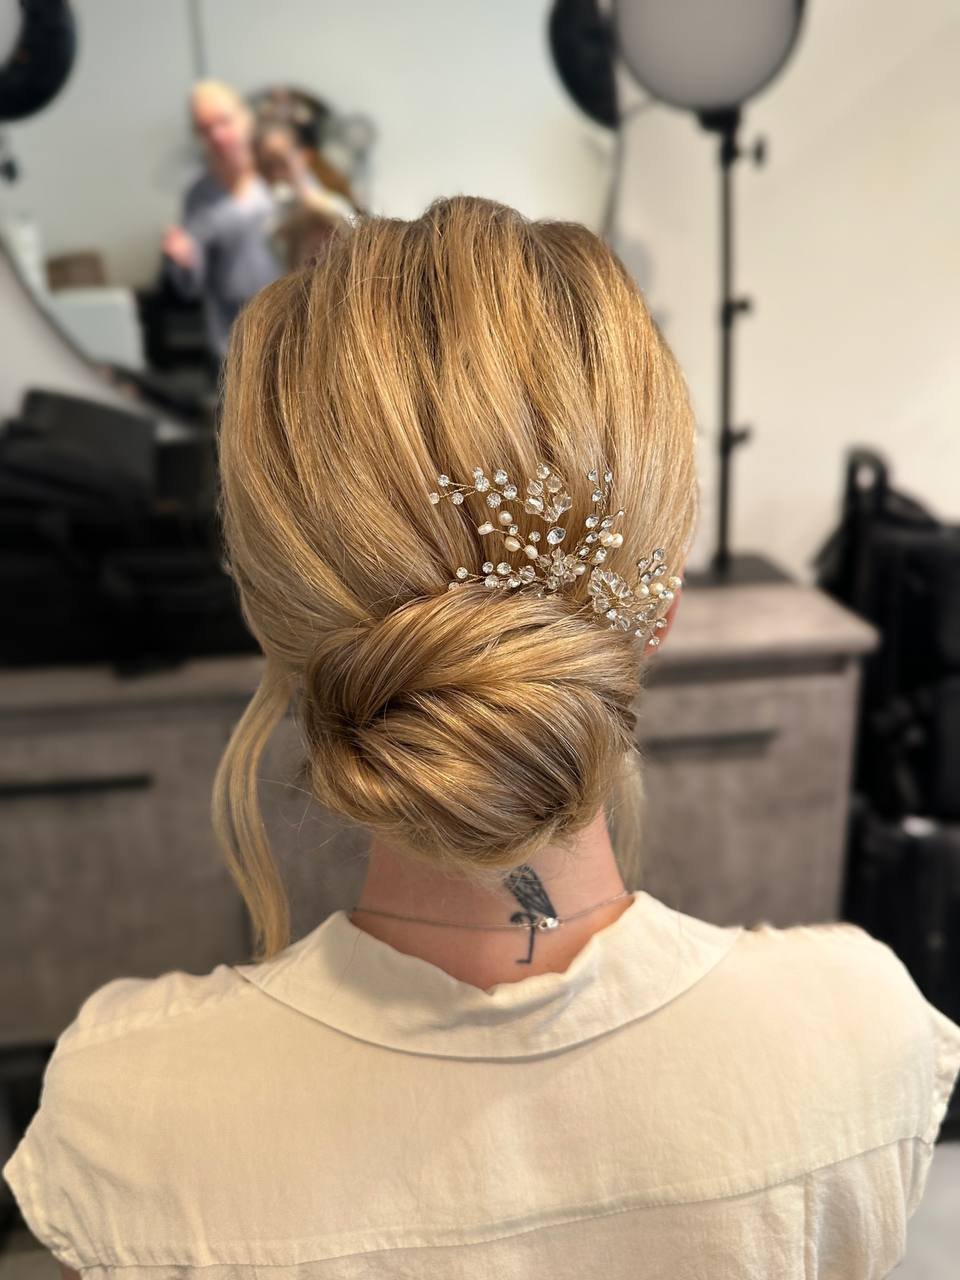 MAKEUP ARTIST AND HAIR STYLIST NYC | Wedding Hair Styles